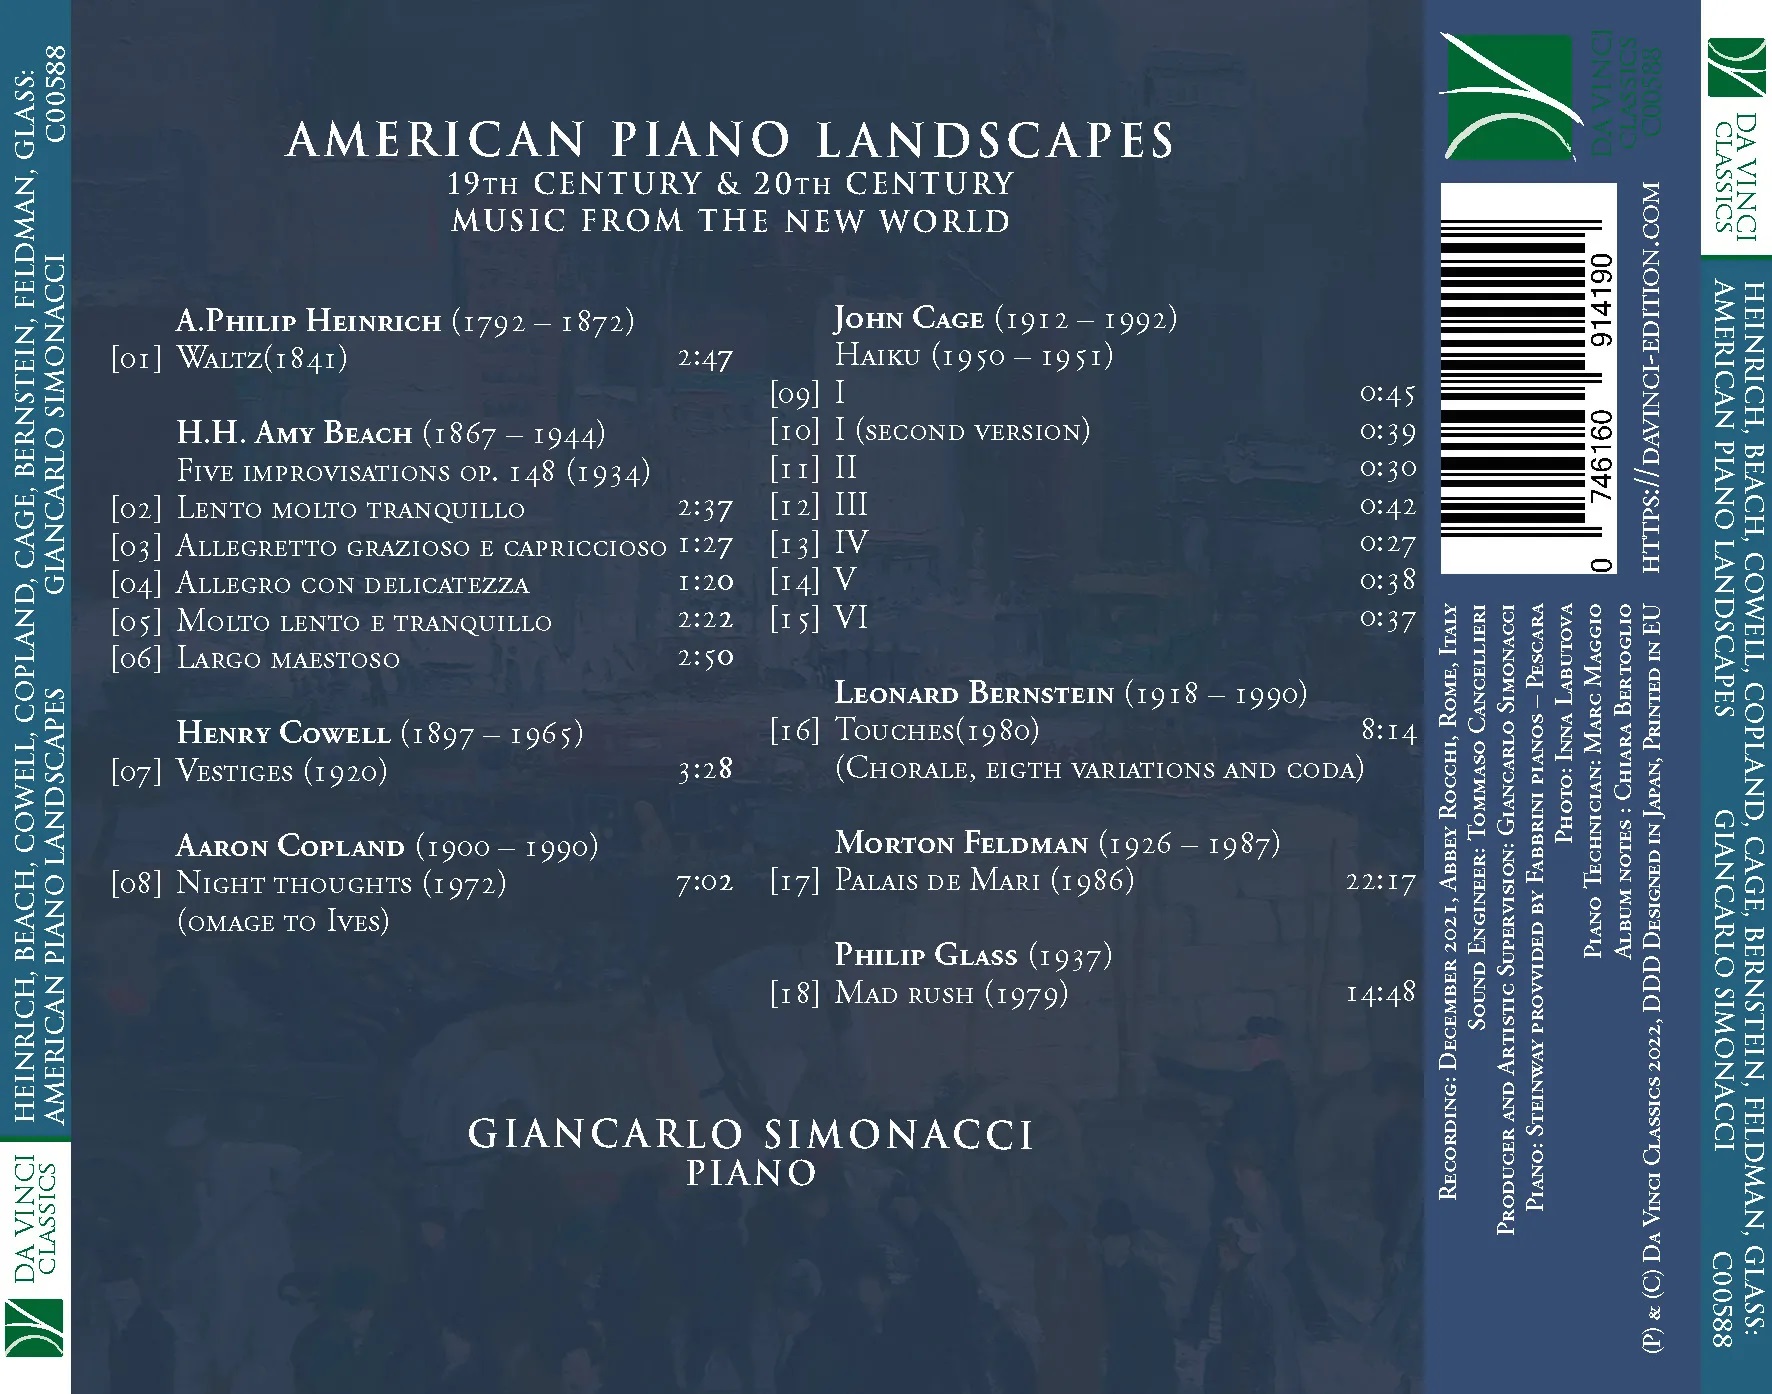 AMERICAN PIANO LANDSCAPES - 19TH Century & 20TH Century - MUSIC FROM THE NEW WORLD